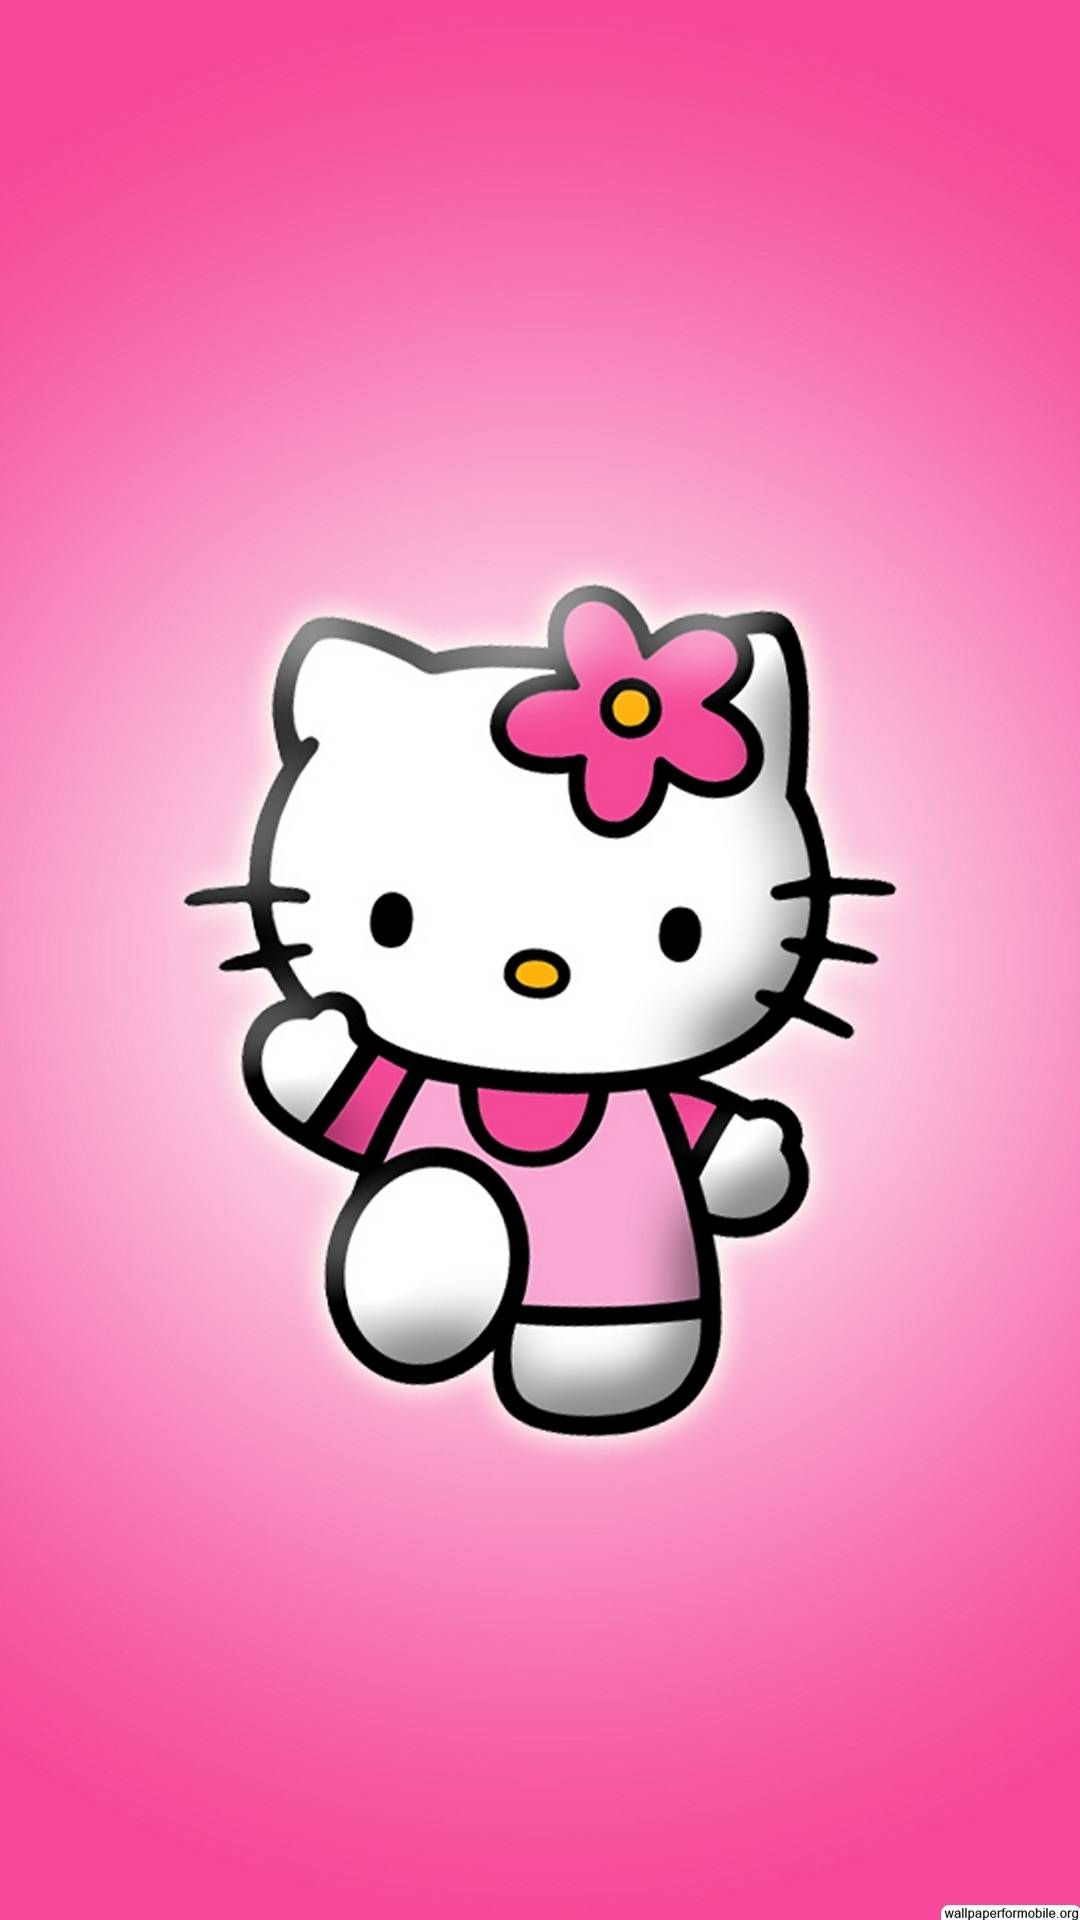 1080x1920 Hello kitty iphone wallpapers top free hello kitty iphone | Hello kitty images, Hello kitty iphone wallpaper, Hello kitty wallpaper hd